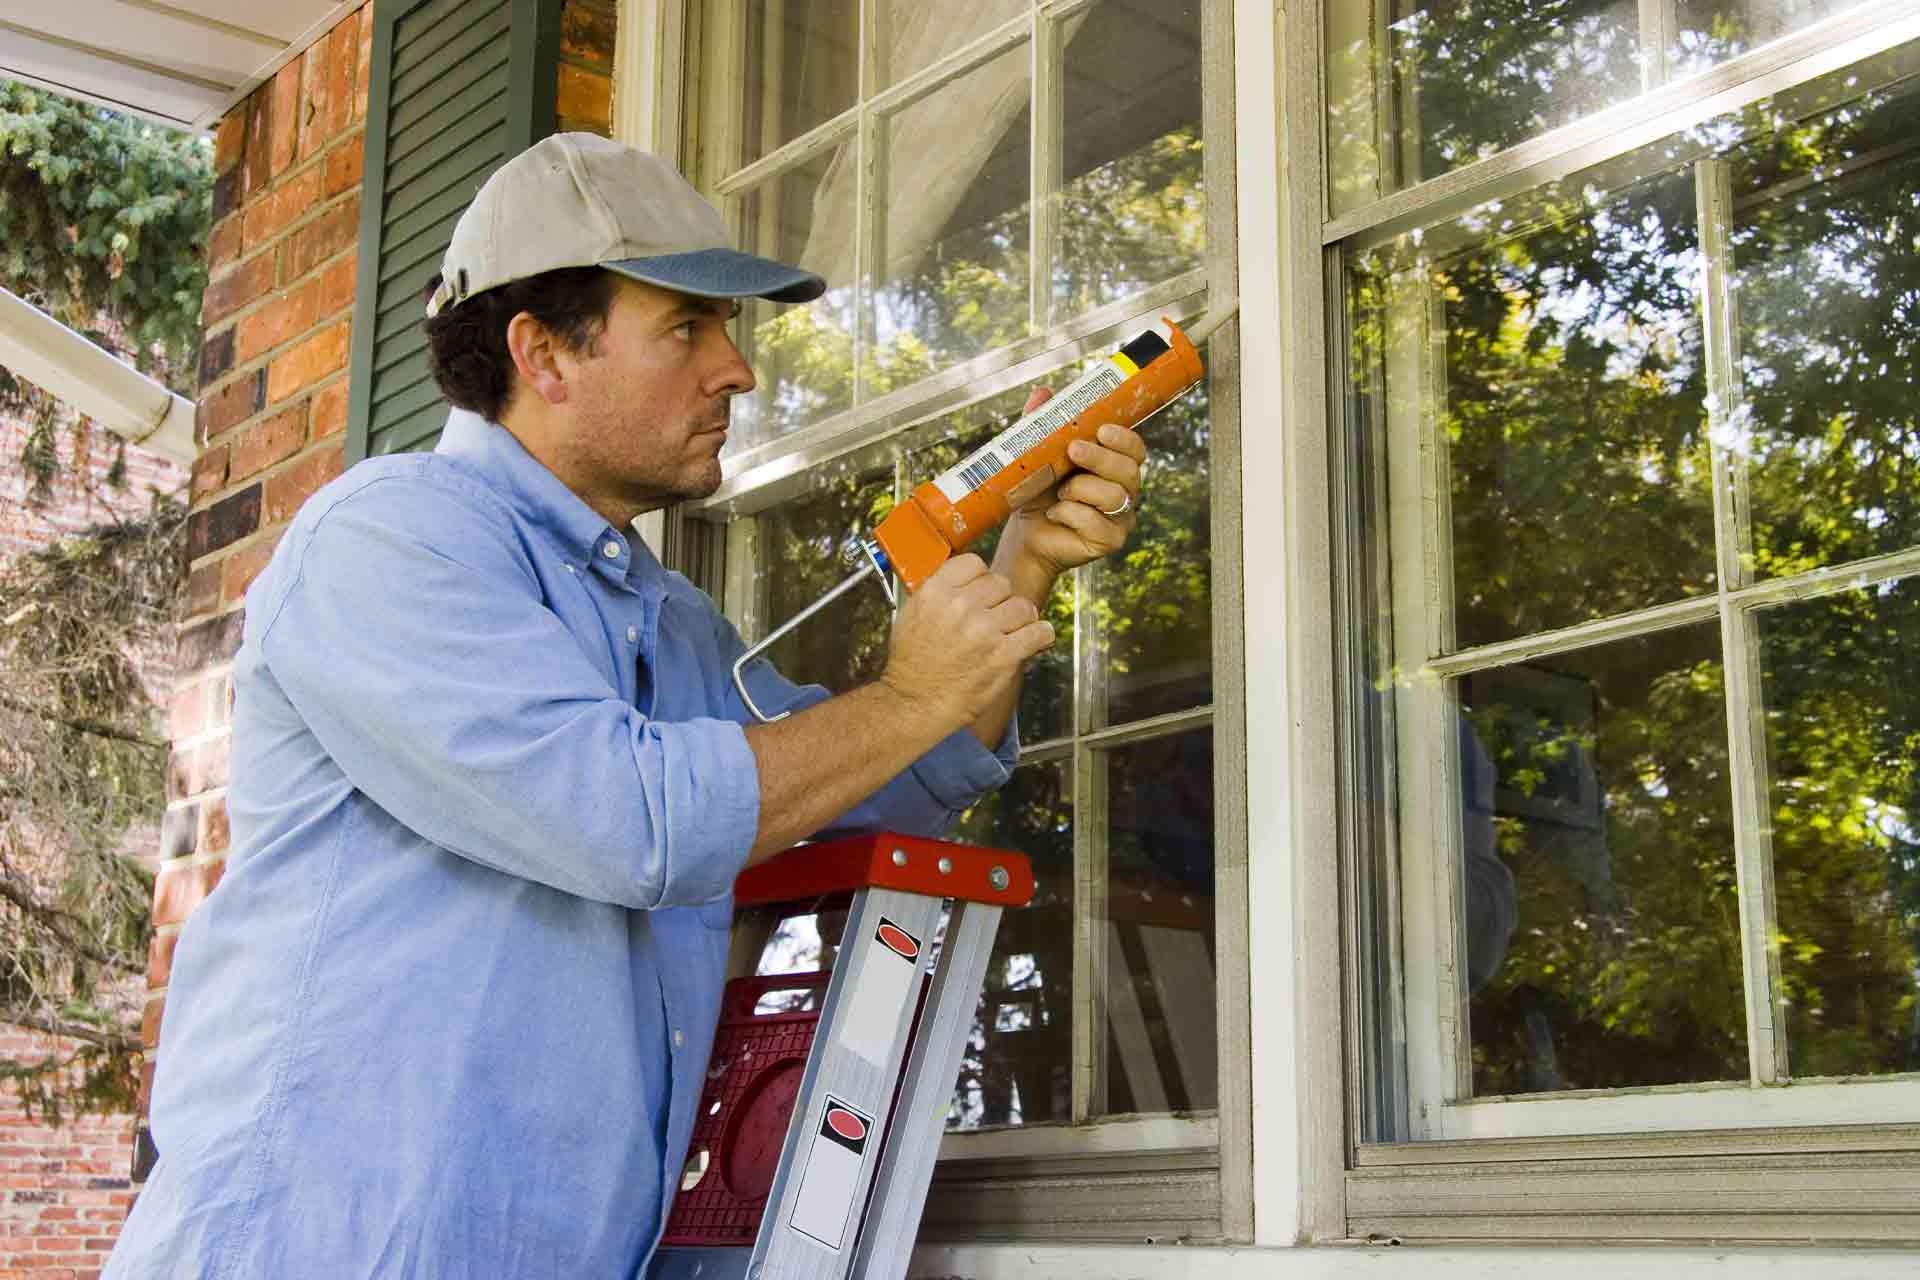 Repair Vs Replace- Solution for Glass in Double-pane Window